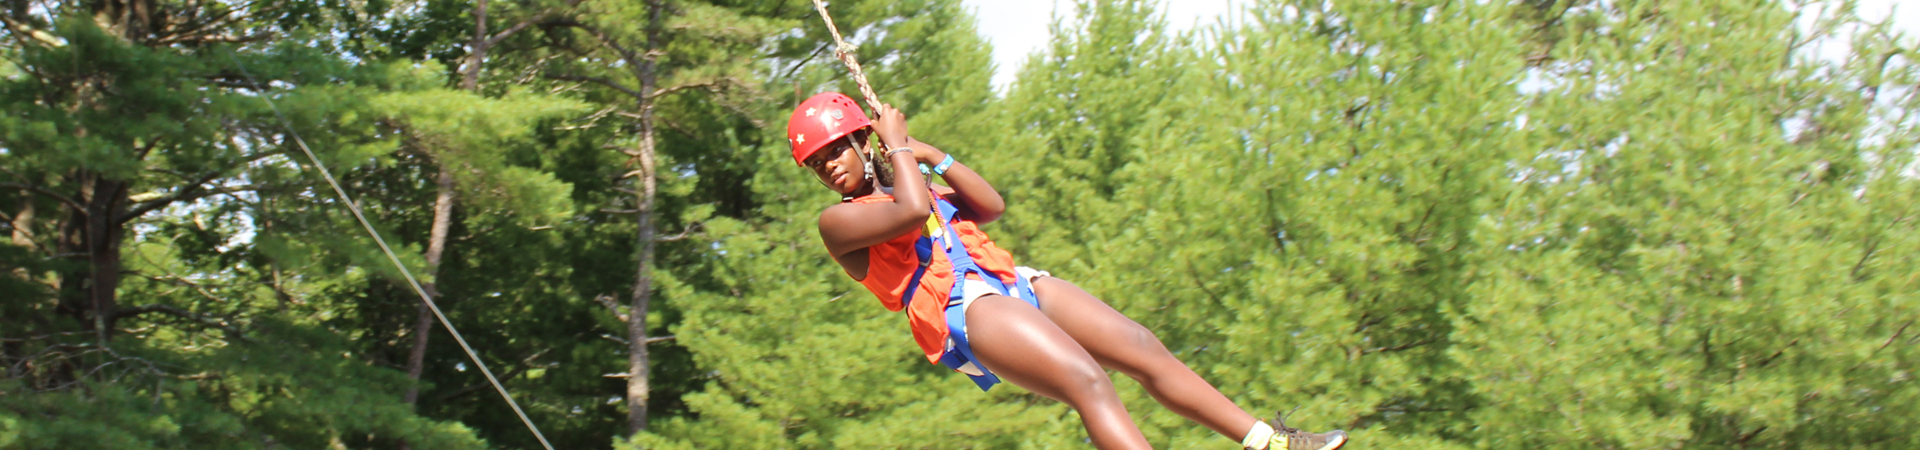  girl on ropes course at camp 